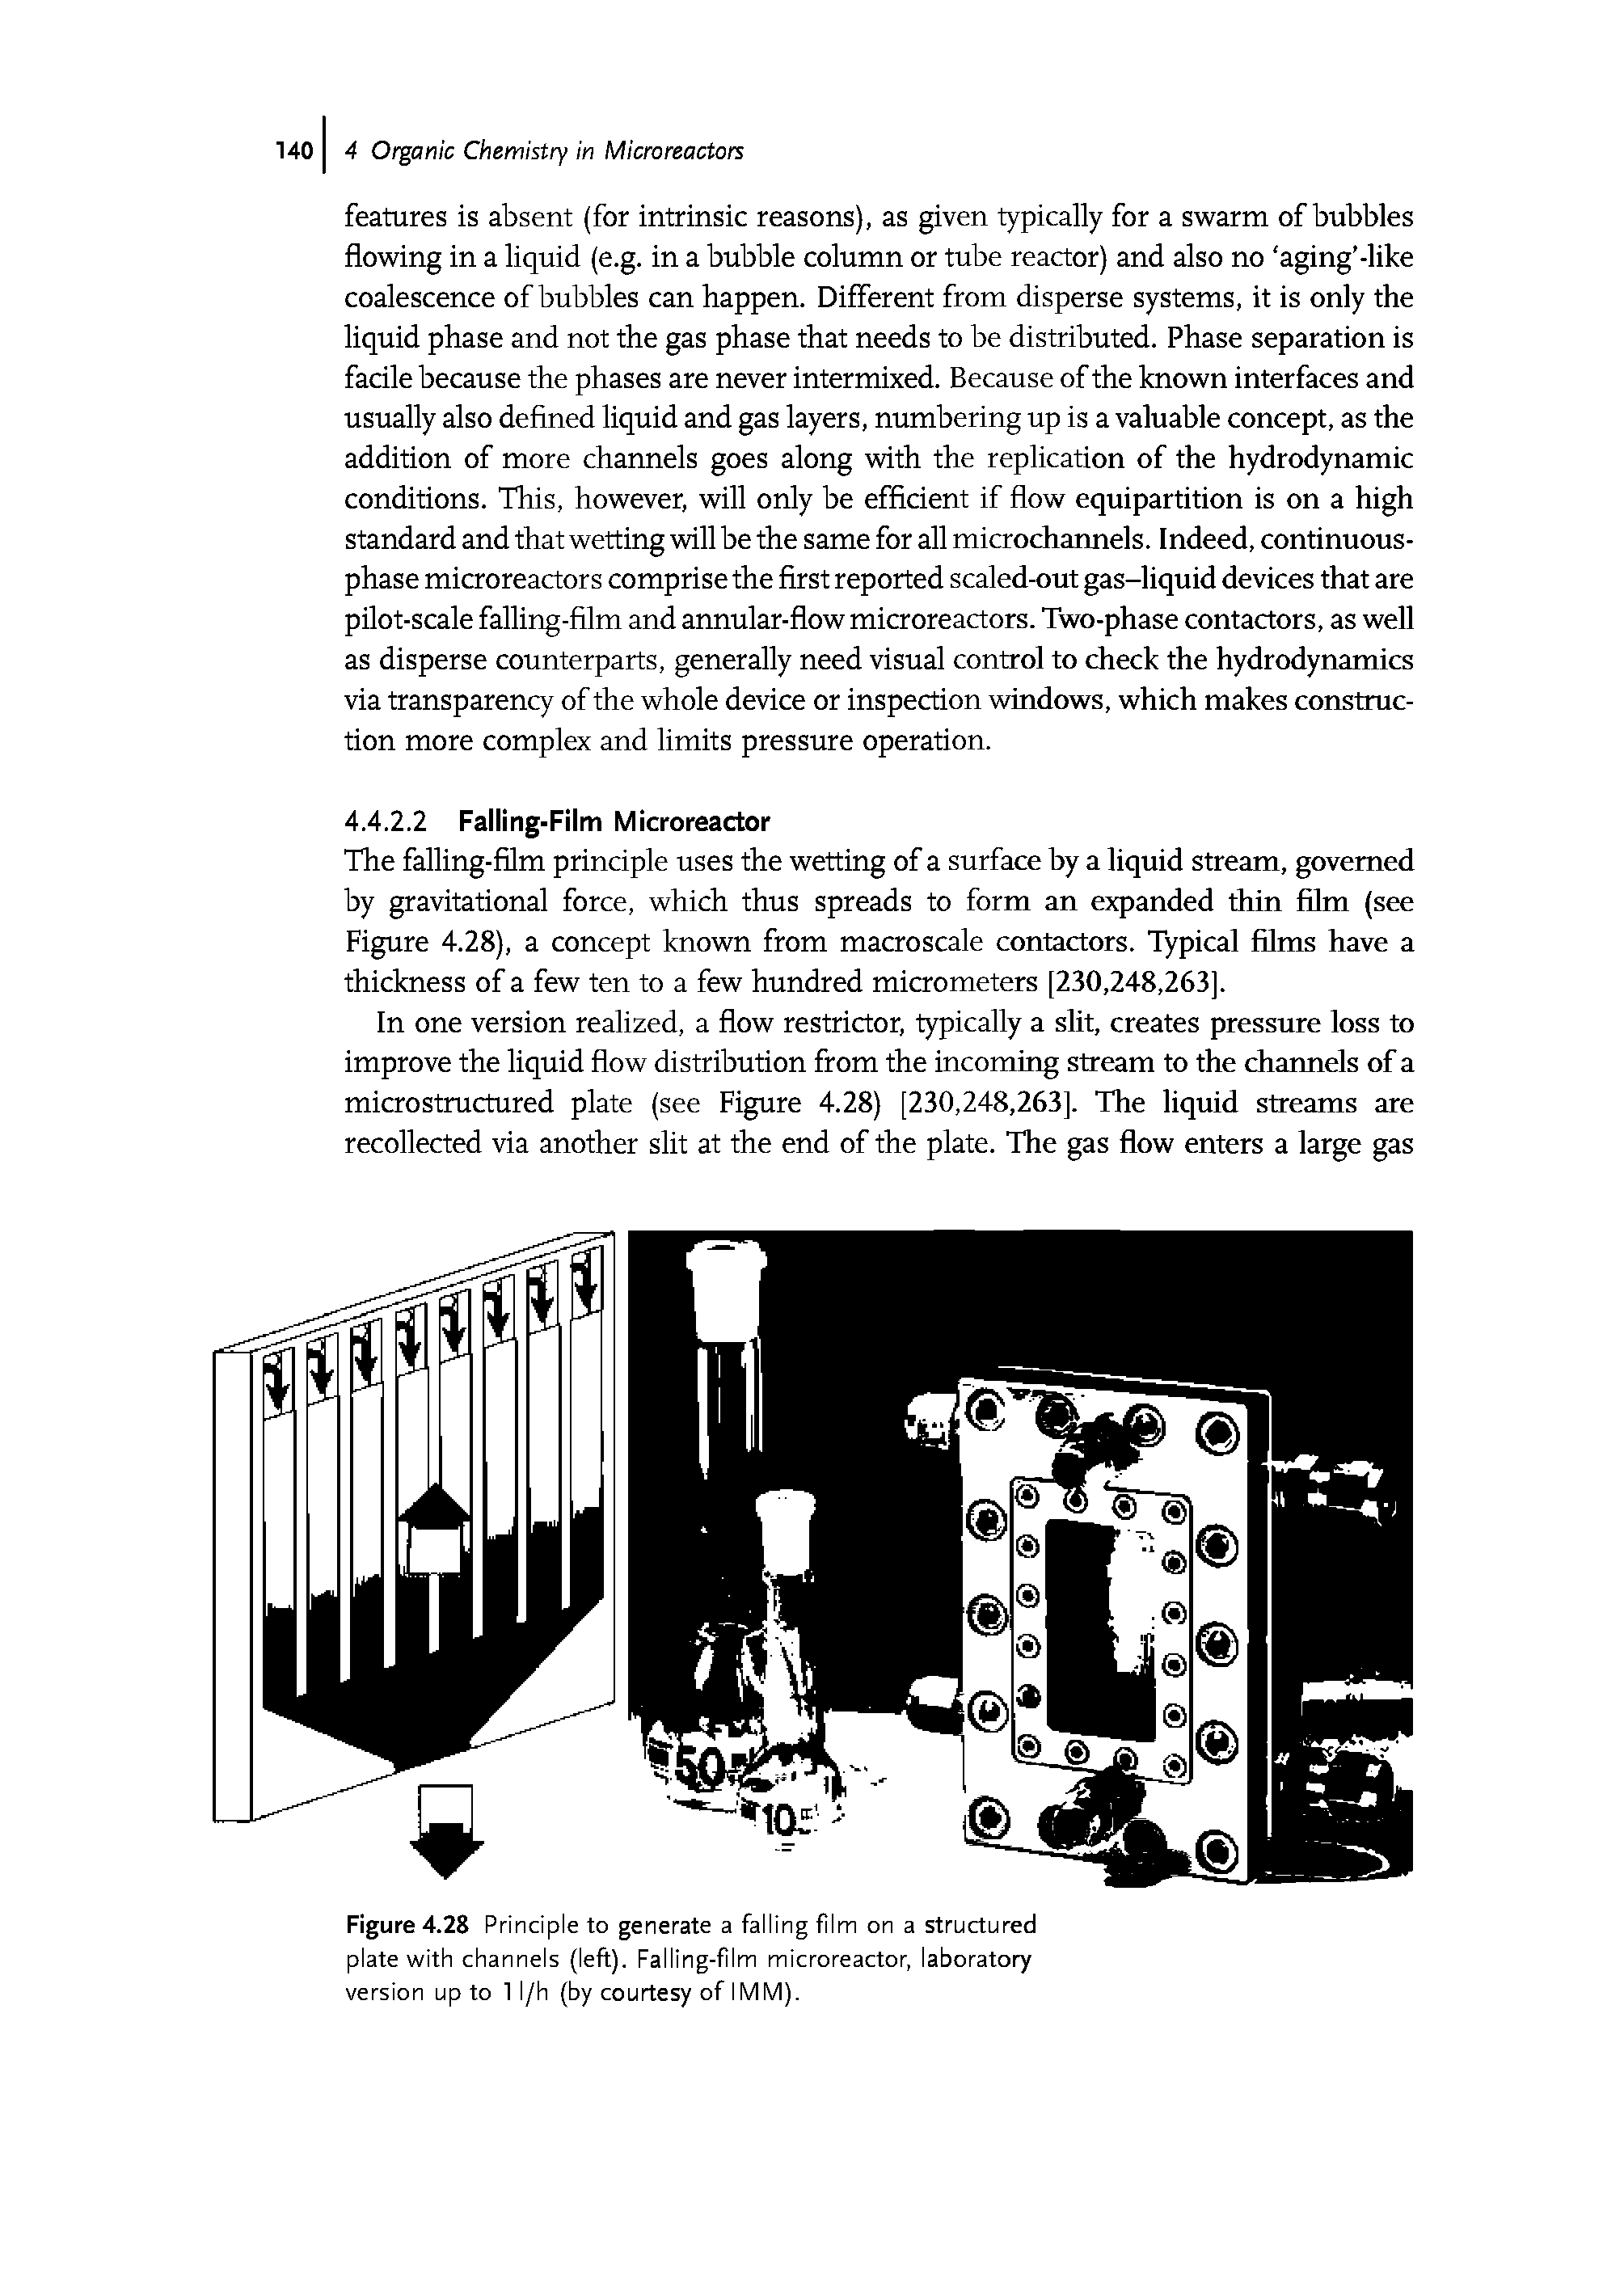 Figure 4.28 Principle to generate a falling film on a structured plate with channels (left). Falling-film microreactor, laboratory version up to 1 l/h (by courtesy of IMM).